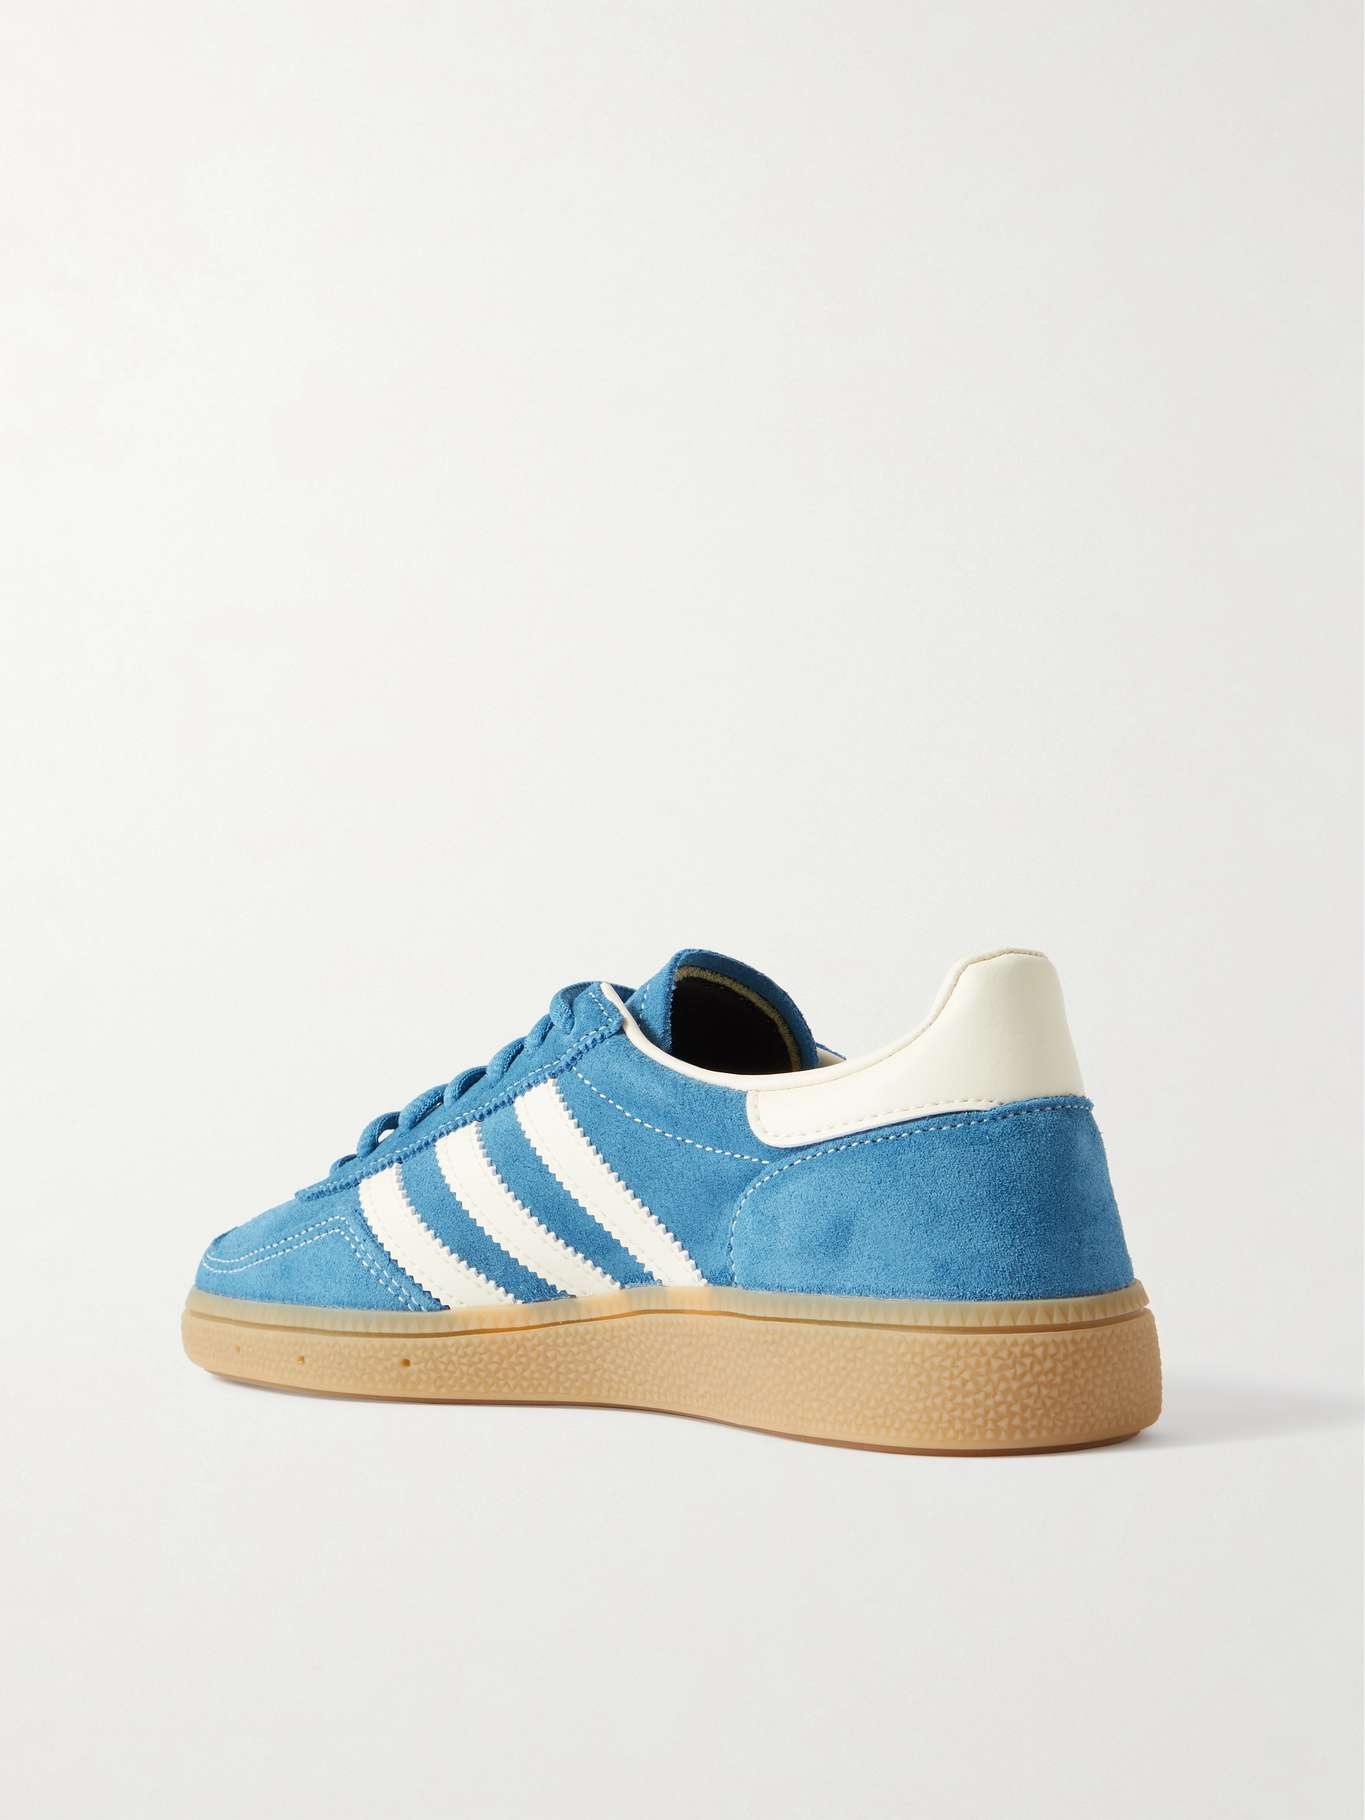 Handball Spezial leather-trimmed suede sneakers - 3